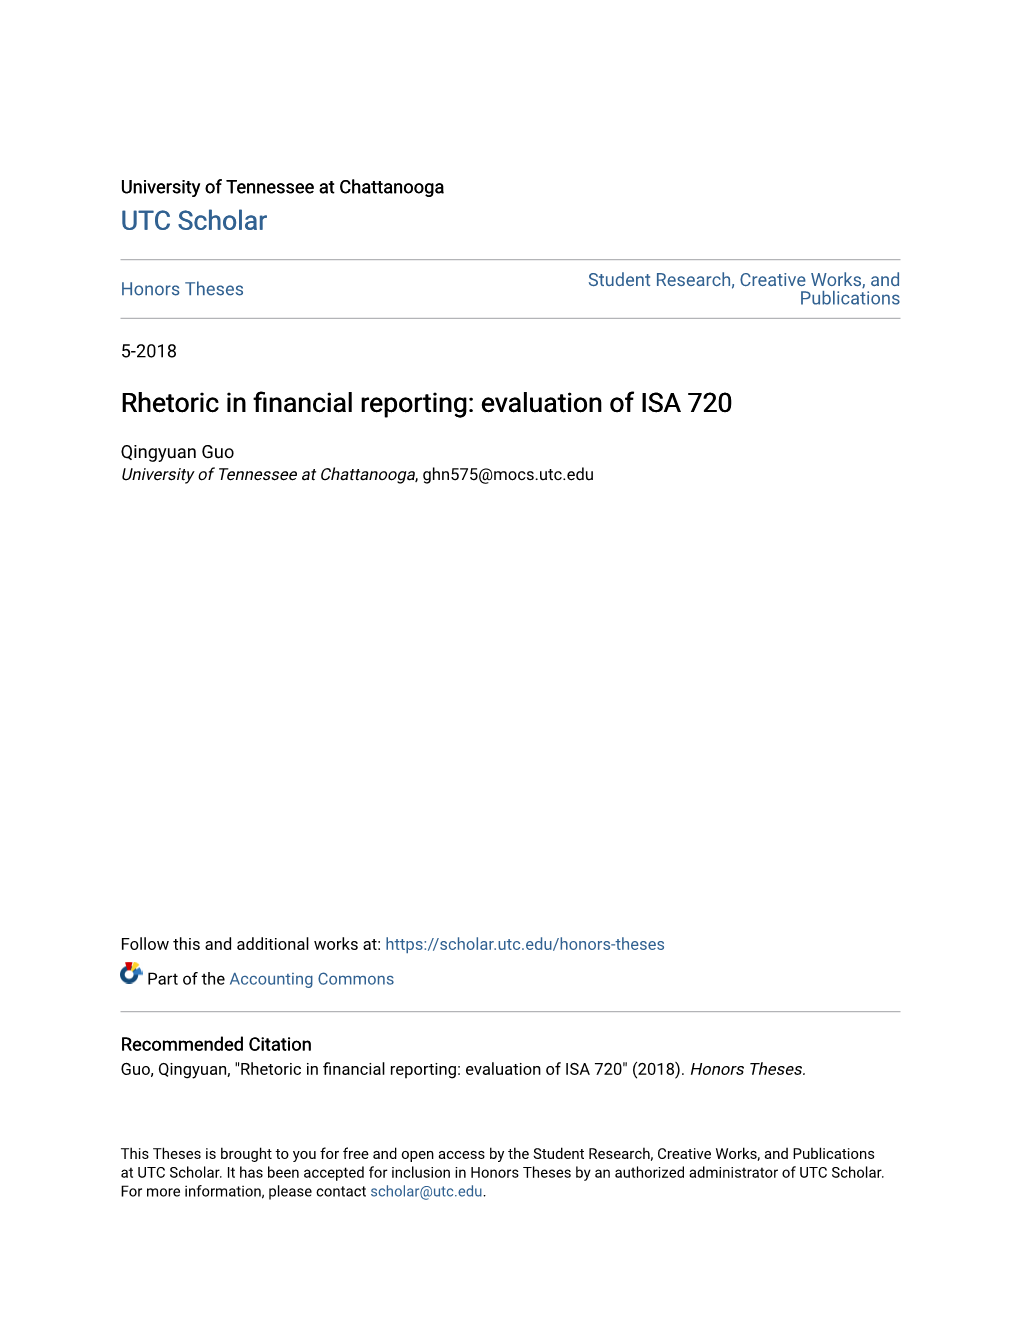 Rhetoric in Financial Reporting: Evaluation of Isa 720